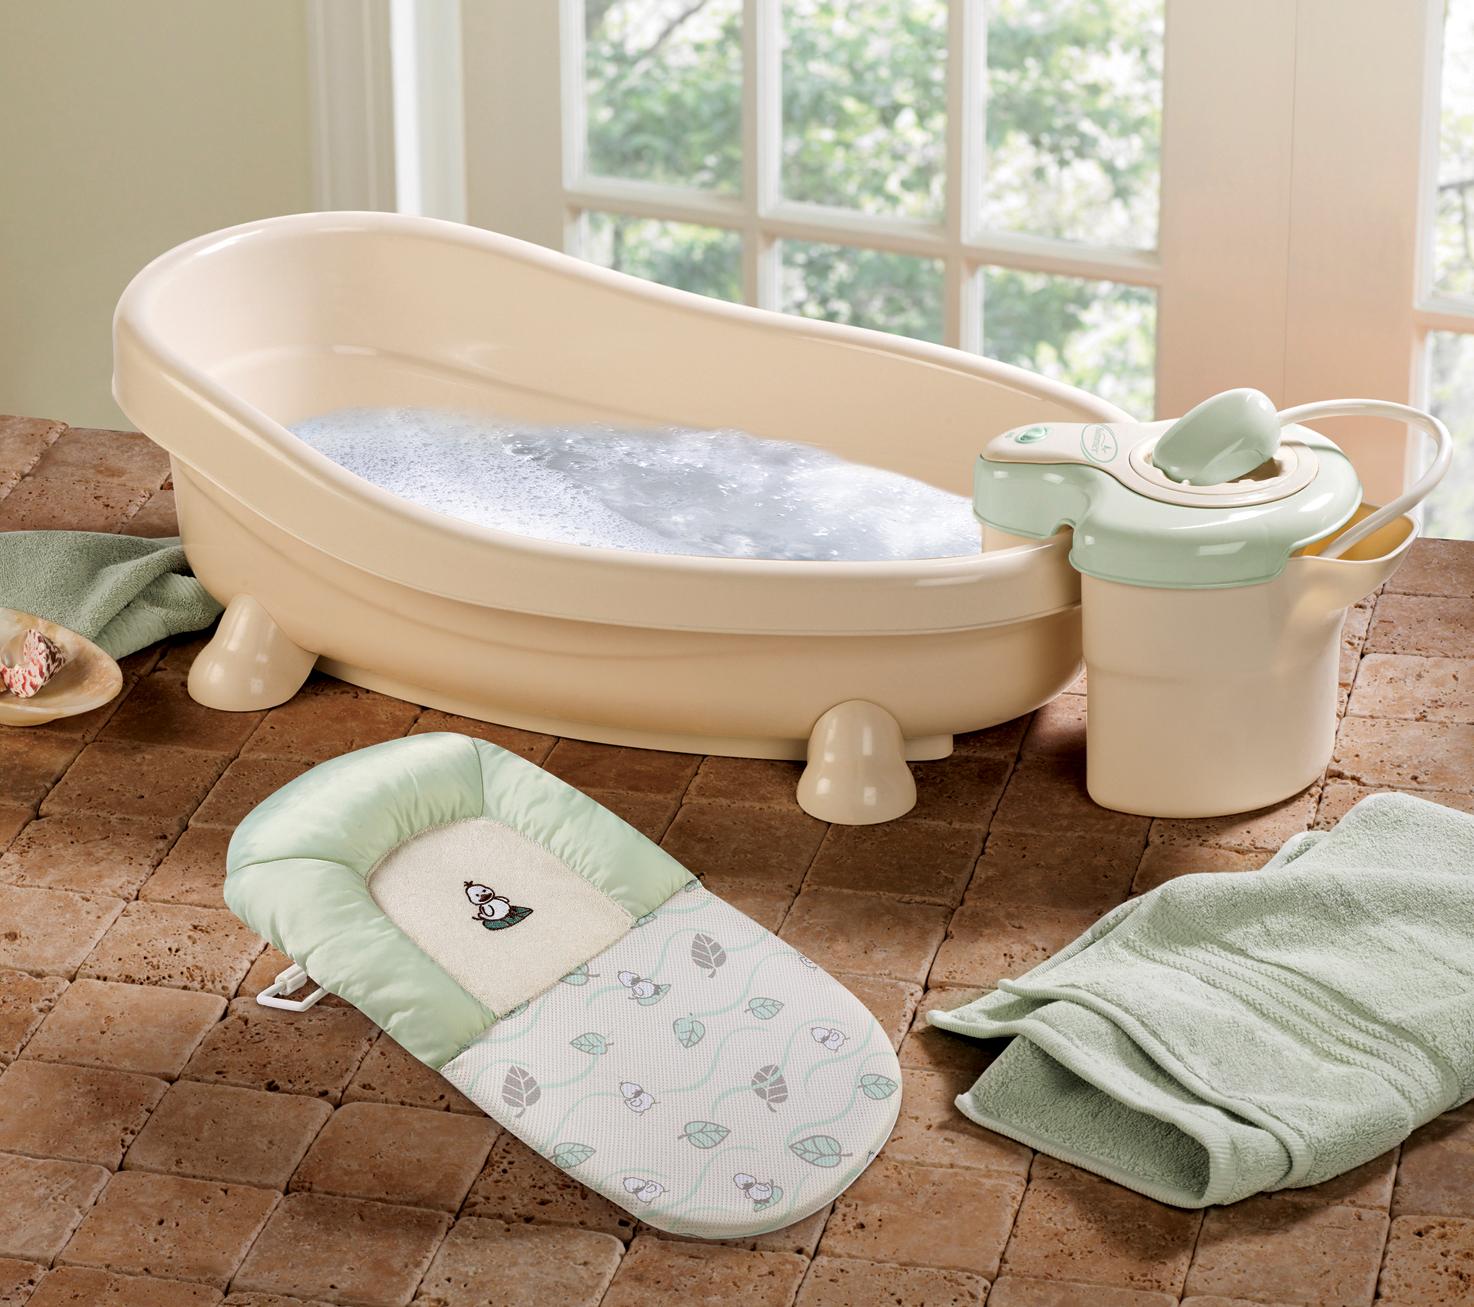 Summer Infant Soothing Spa and Shower